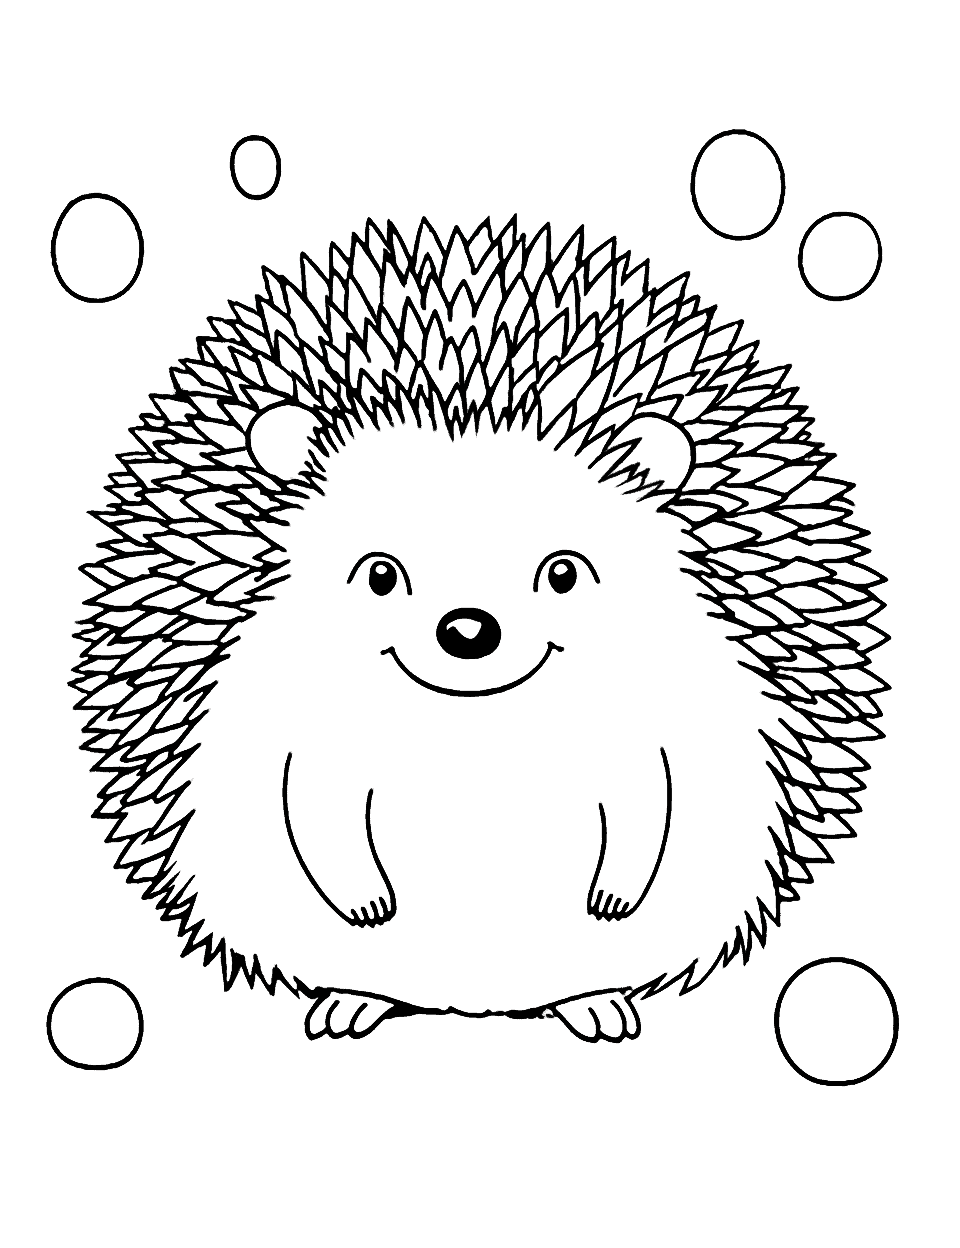 Cute Hedgehog Animal Coloring Page - A cute hedgehog curled up into a tiny ball, covered in spines.